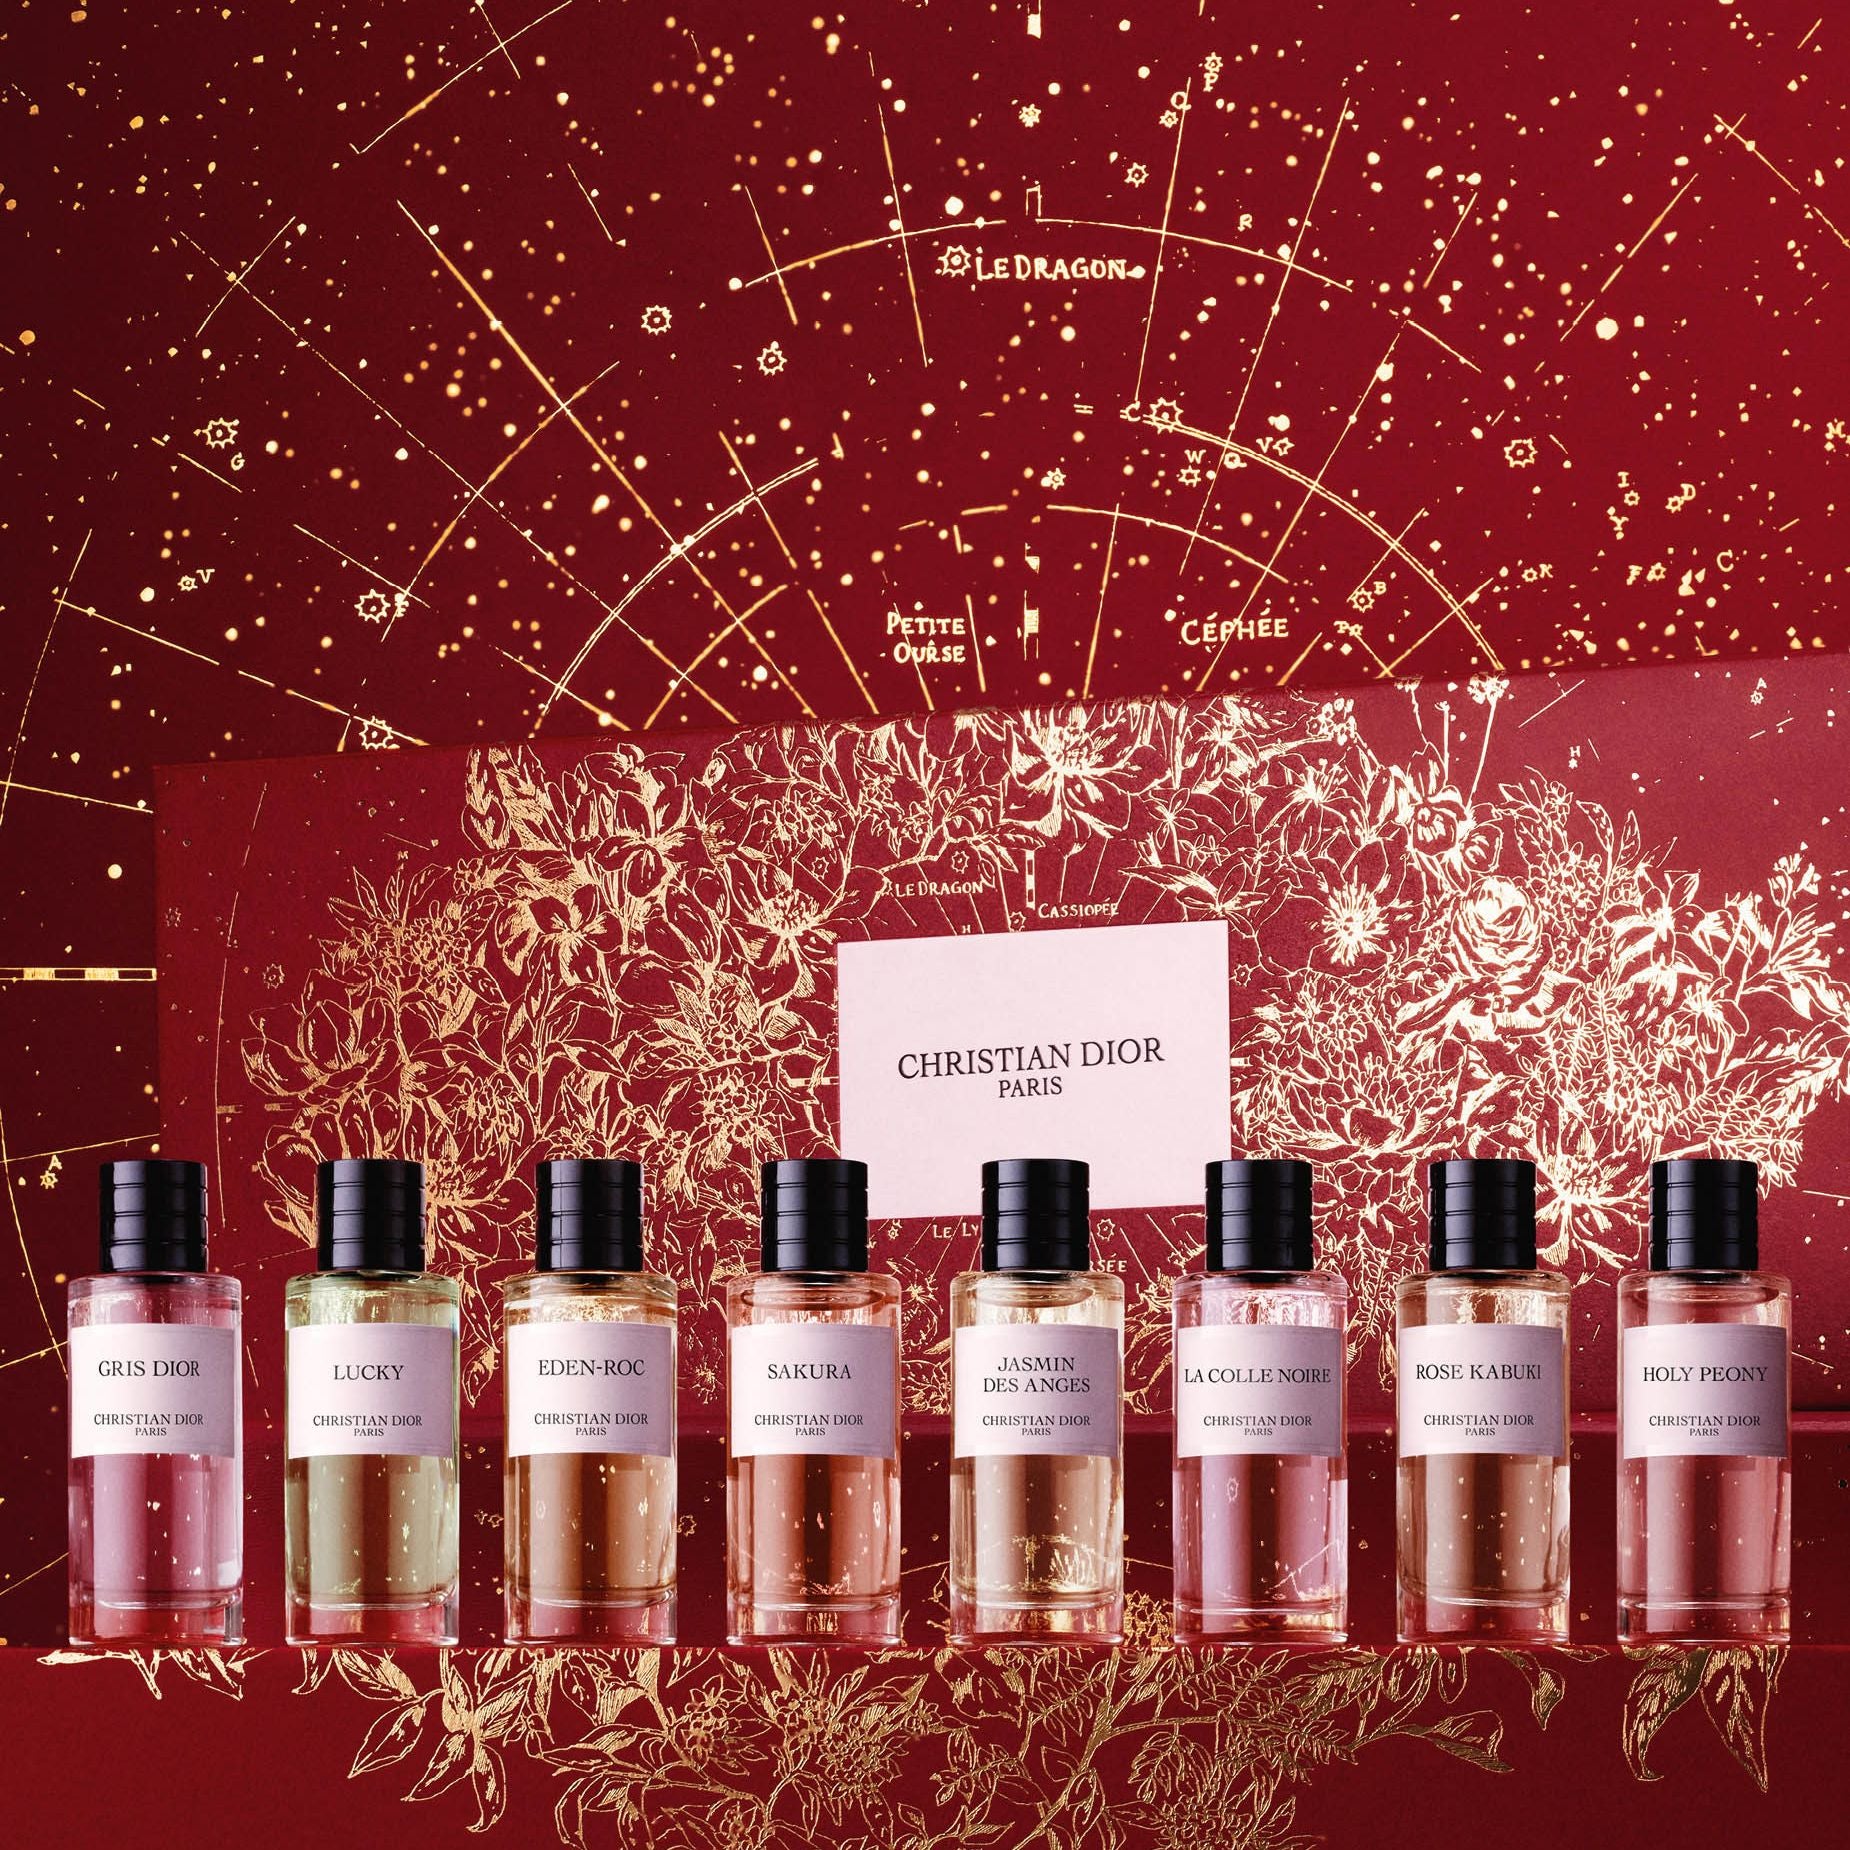 FRAGRANCE DISCOVERY SET - LUNAR NEW YEAR LIMITED EDITION ~ 8 La Collection Privée Christian Dior Fragrance Miniatures